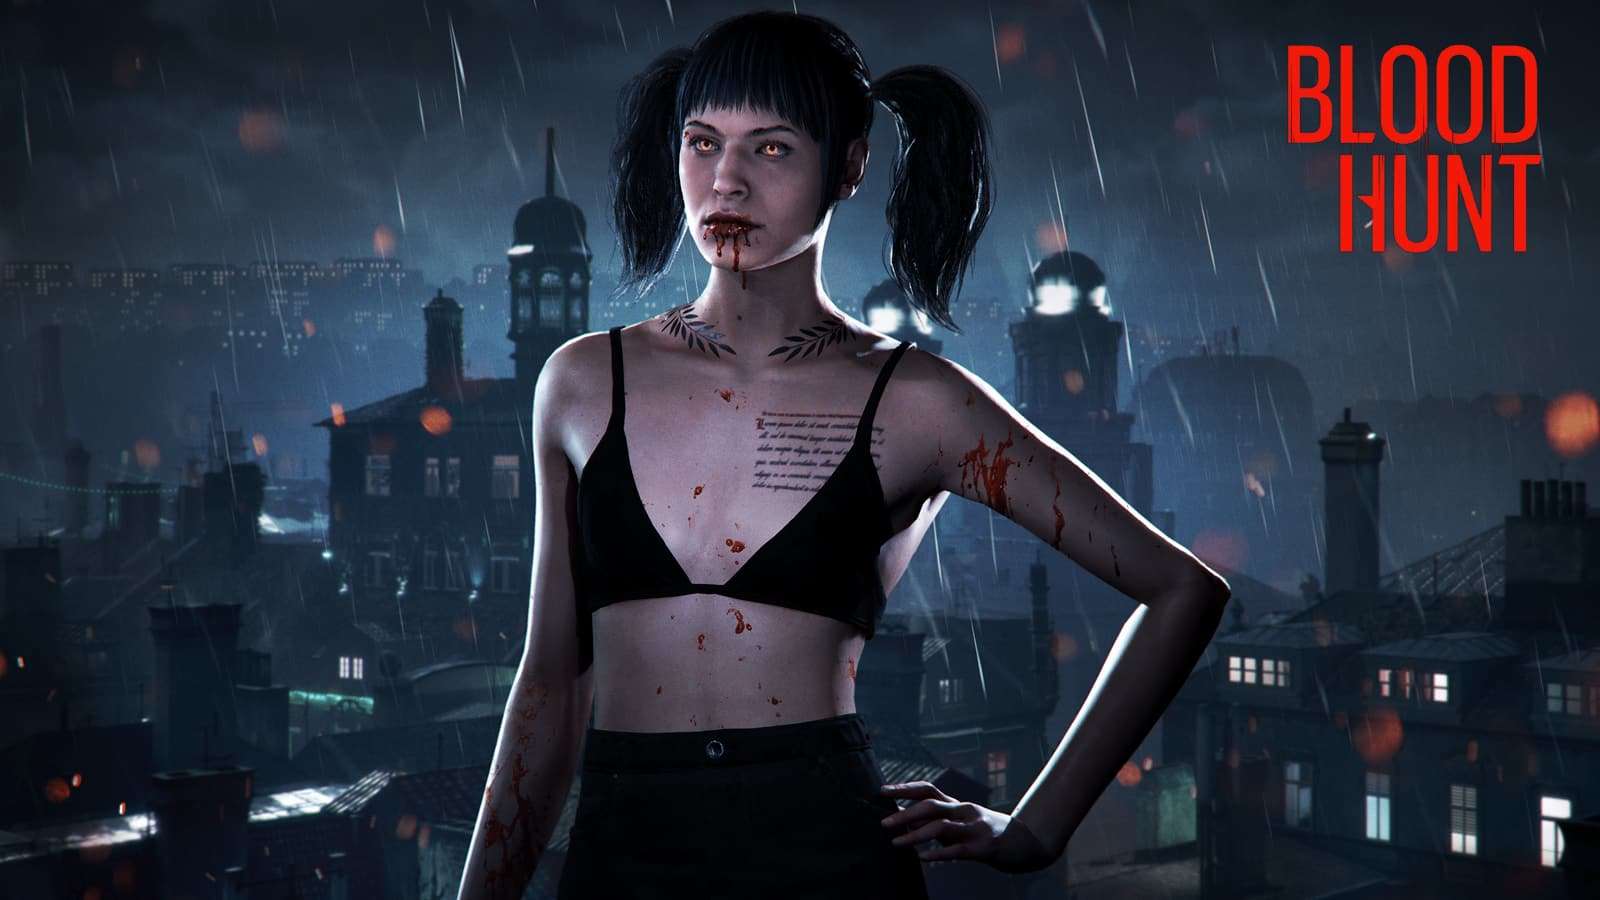 vampire the masquerade bloodhunt female vampire in prague stands with hand on hip